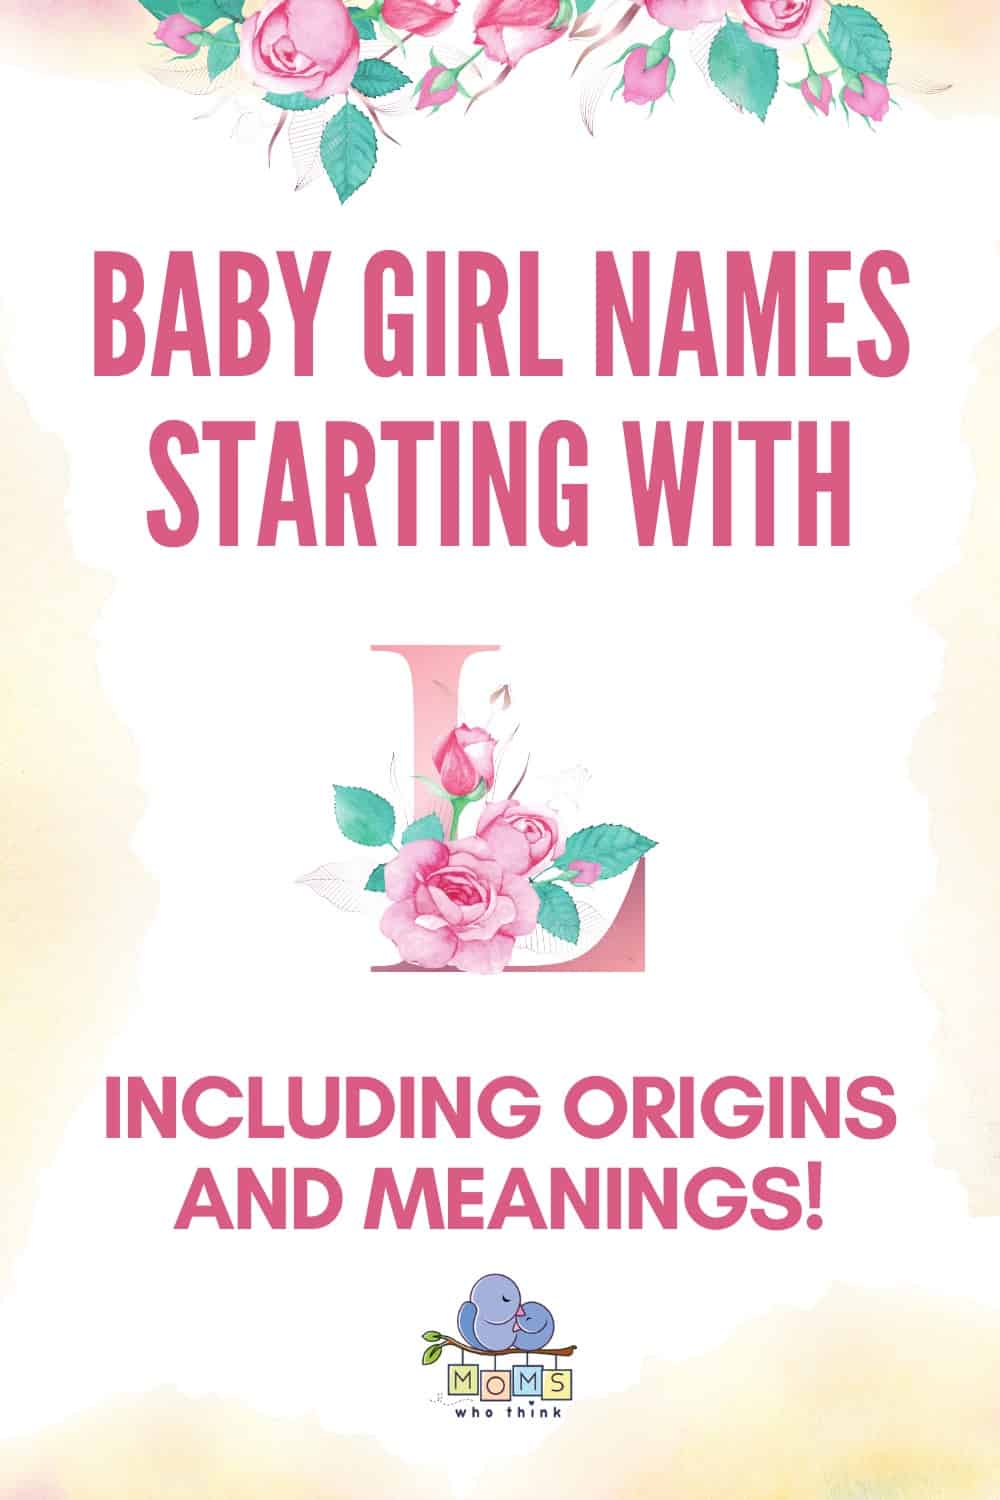 Baby girl names starting with L